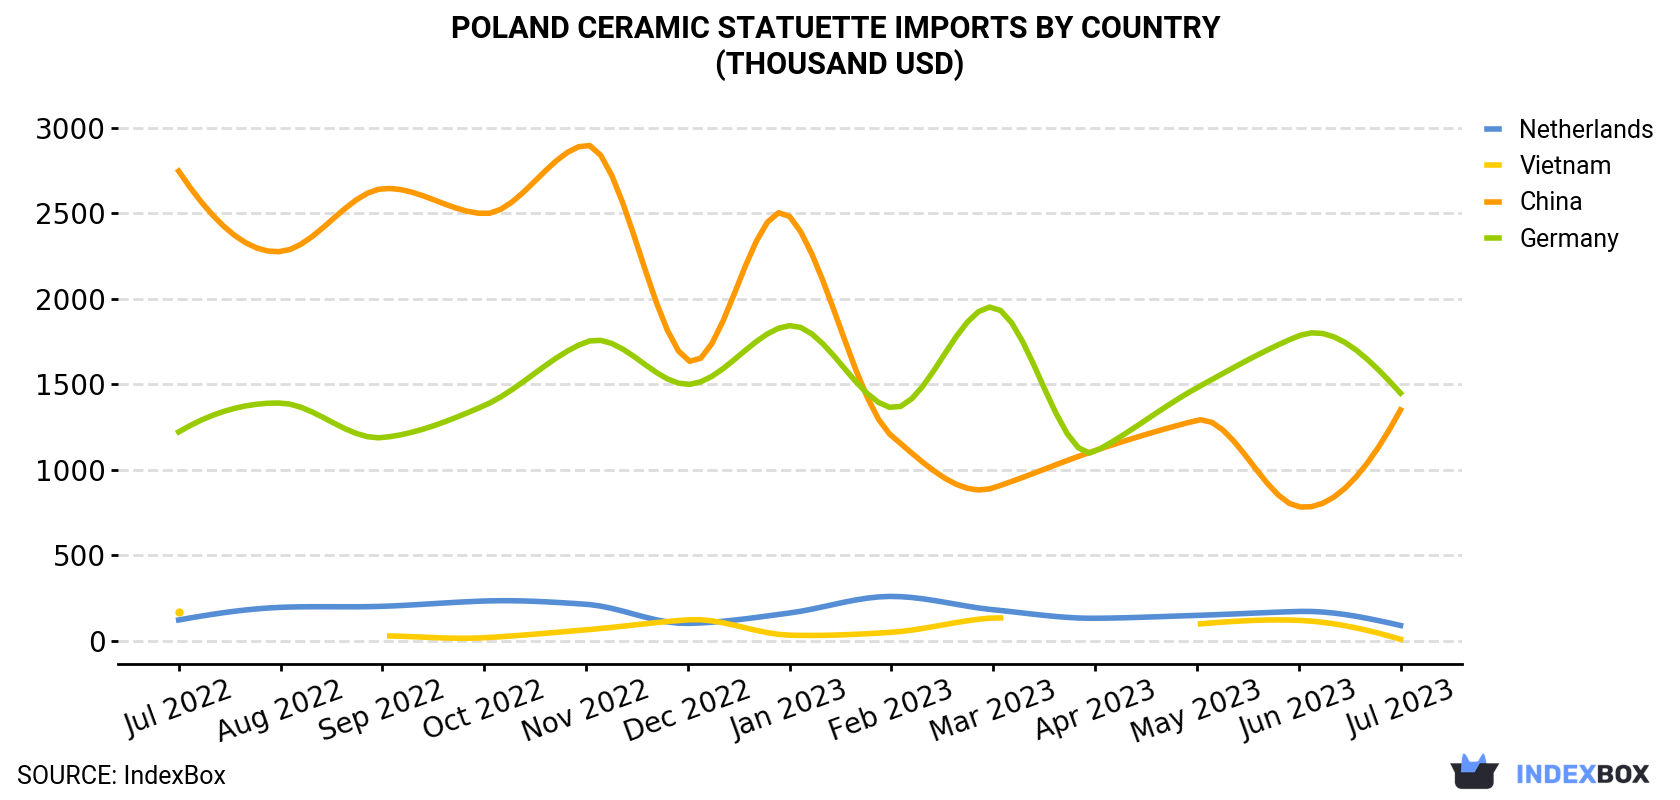 Poland Ceramic Statuette Imports By Country (Thousand USD)